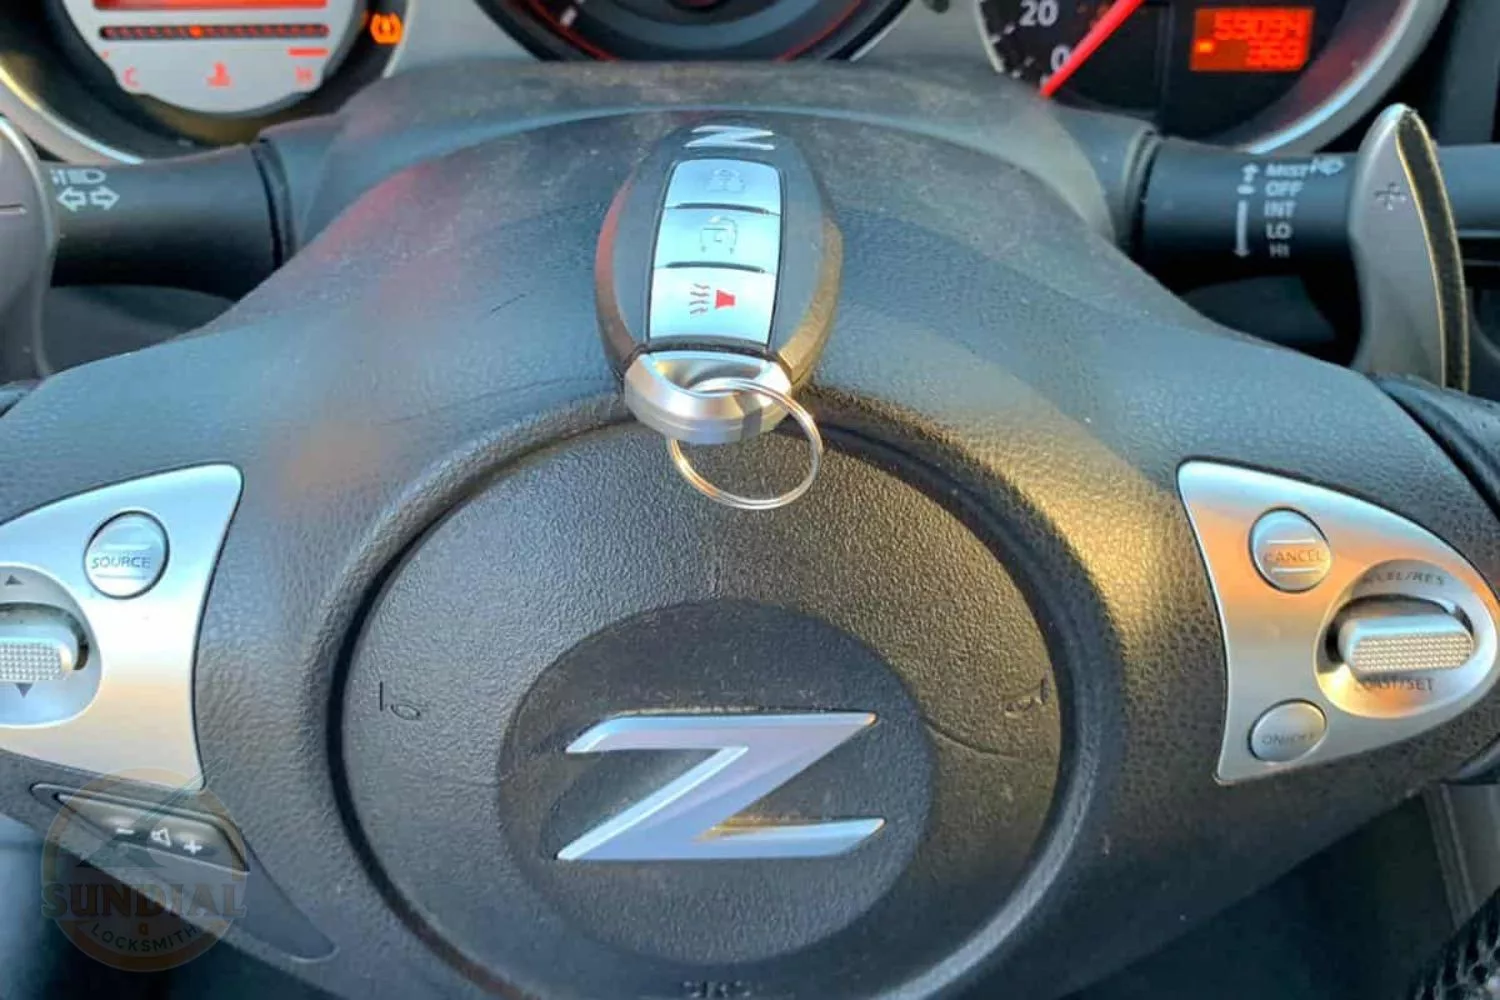 Nissan Z-Series car dashboard from driver's perspective